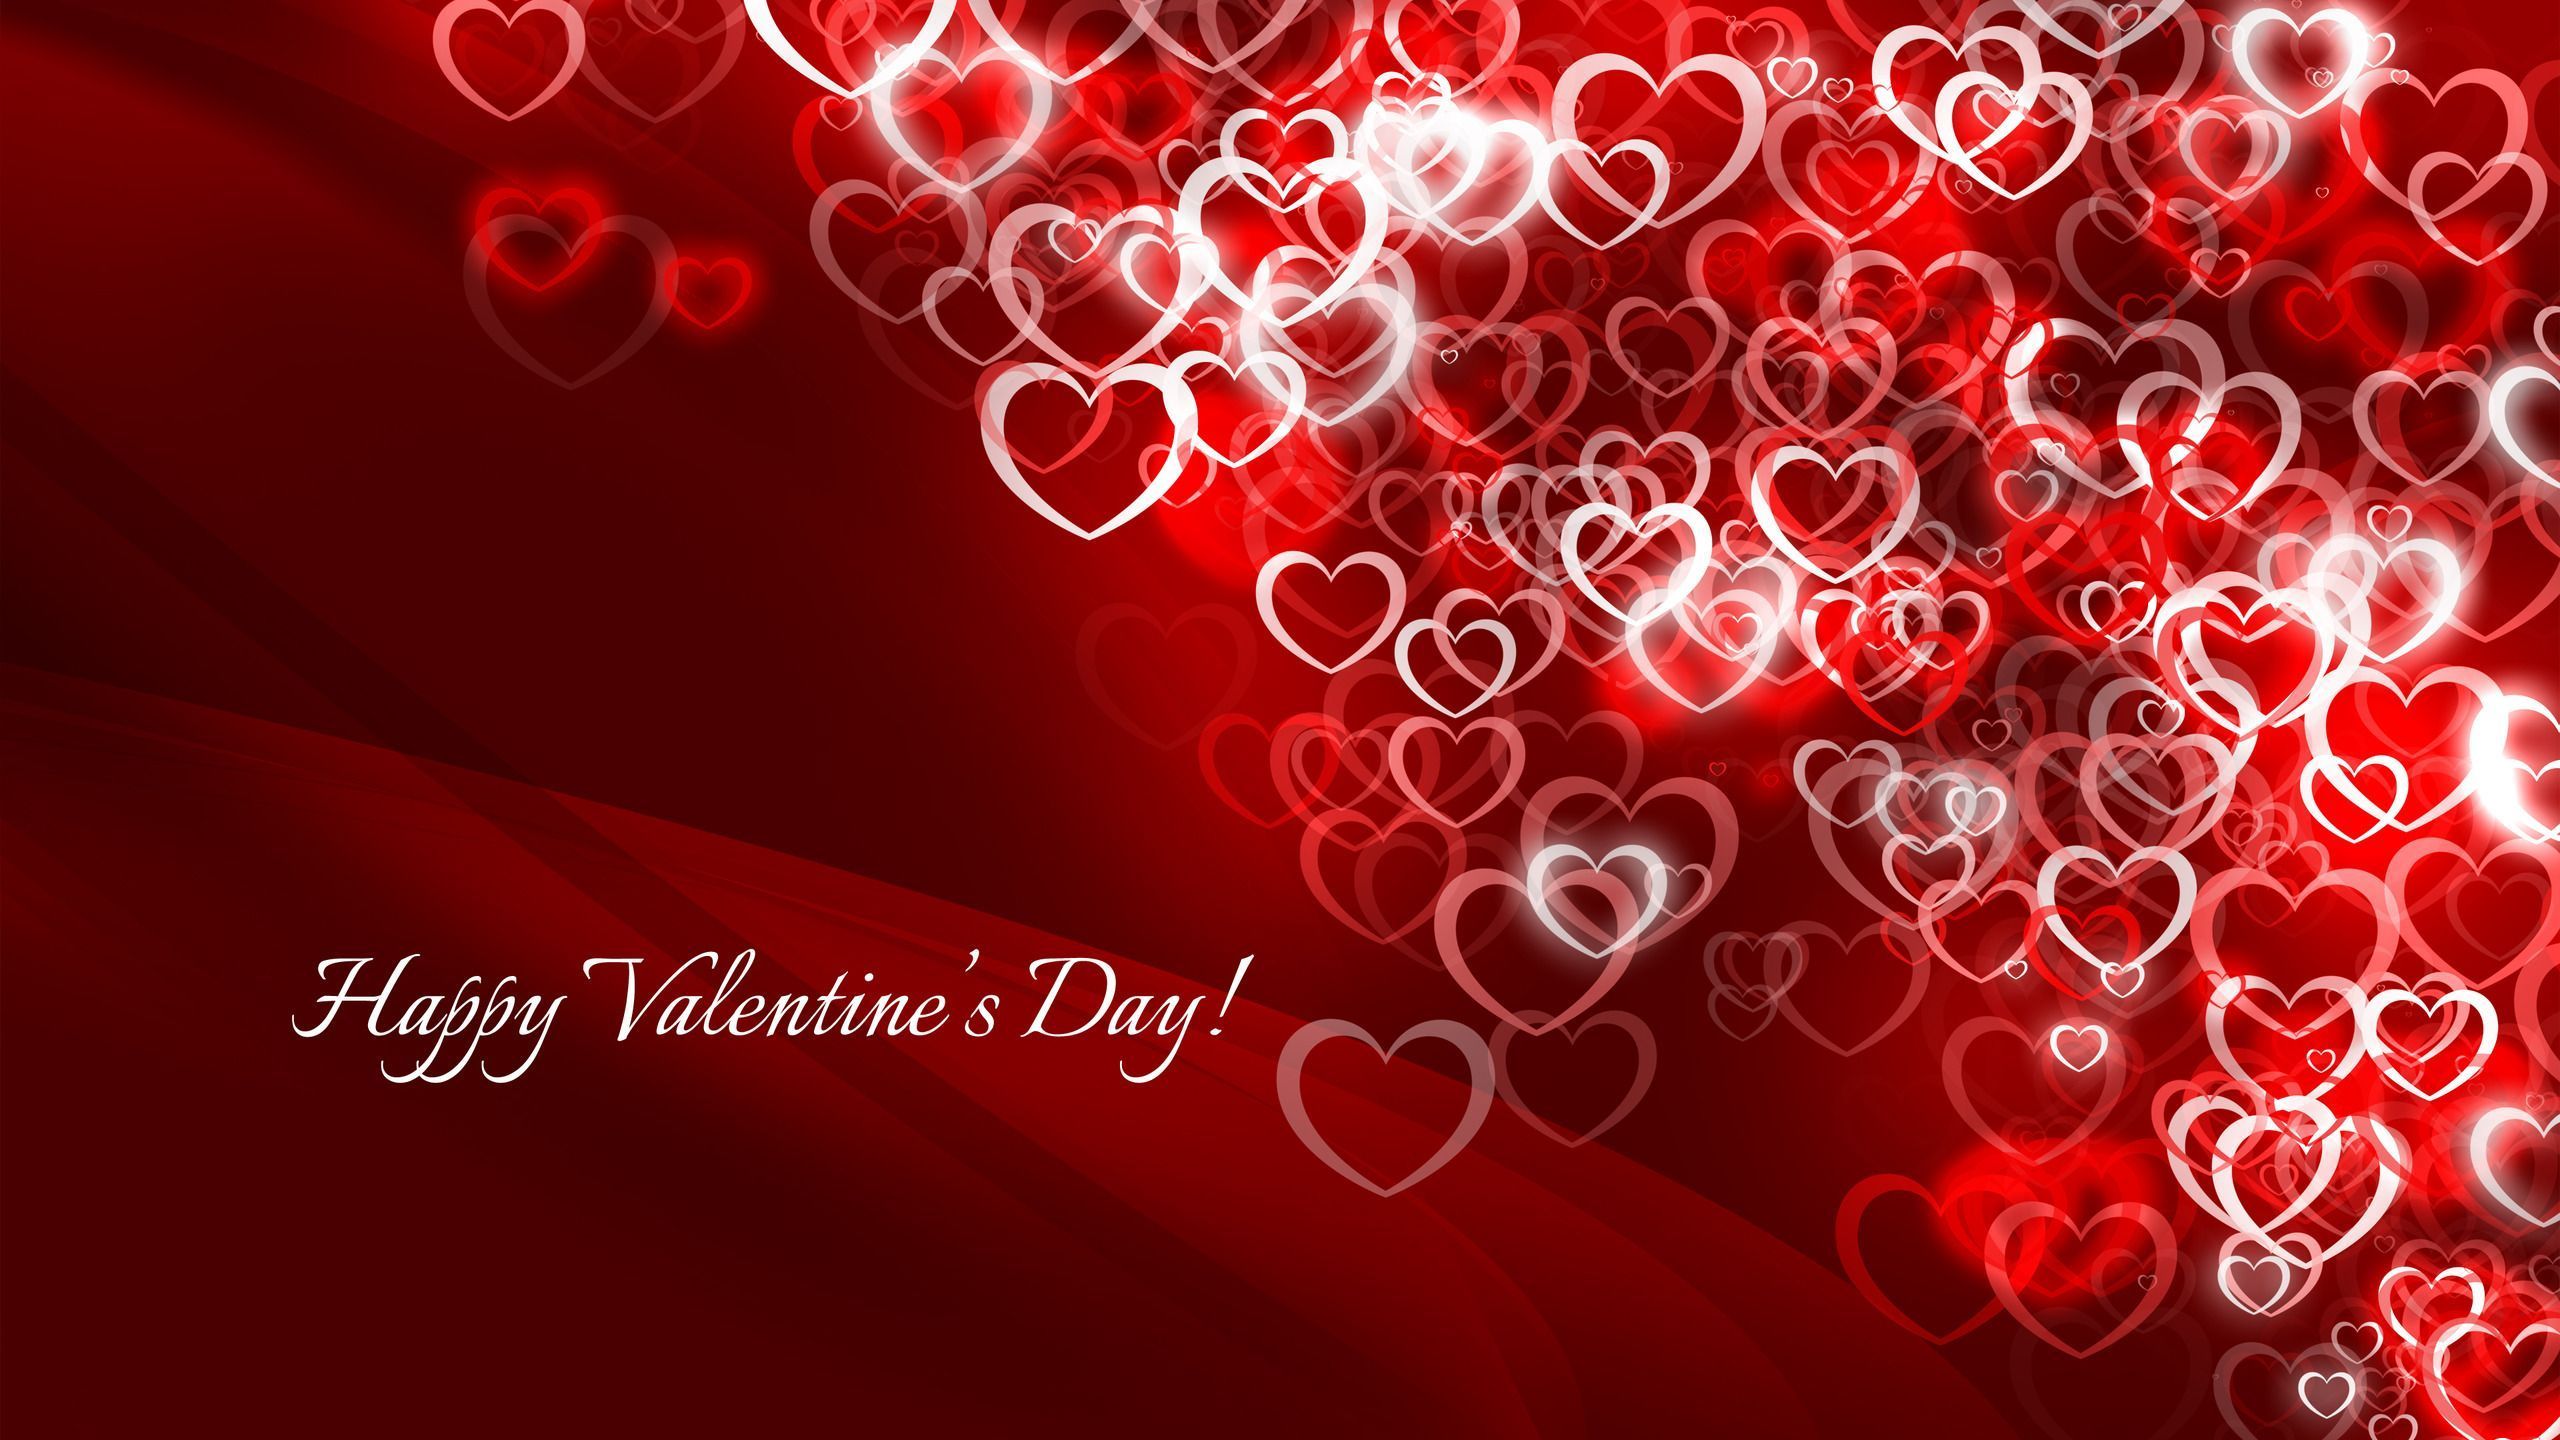 Happy Valentine's Day Wallpapers HD 2016 | Wallpapers, Backgrounds ...